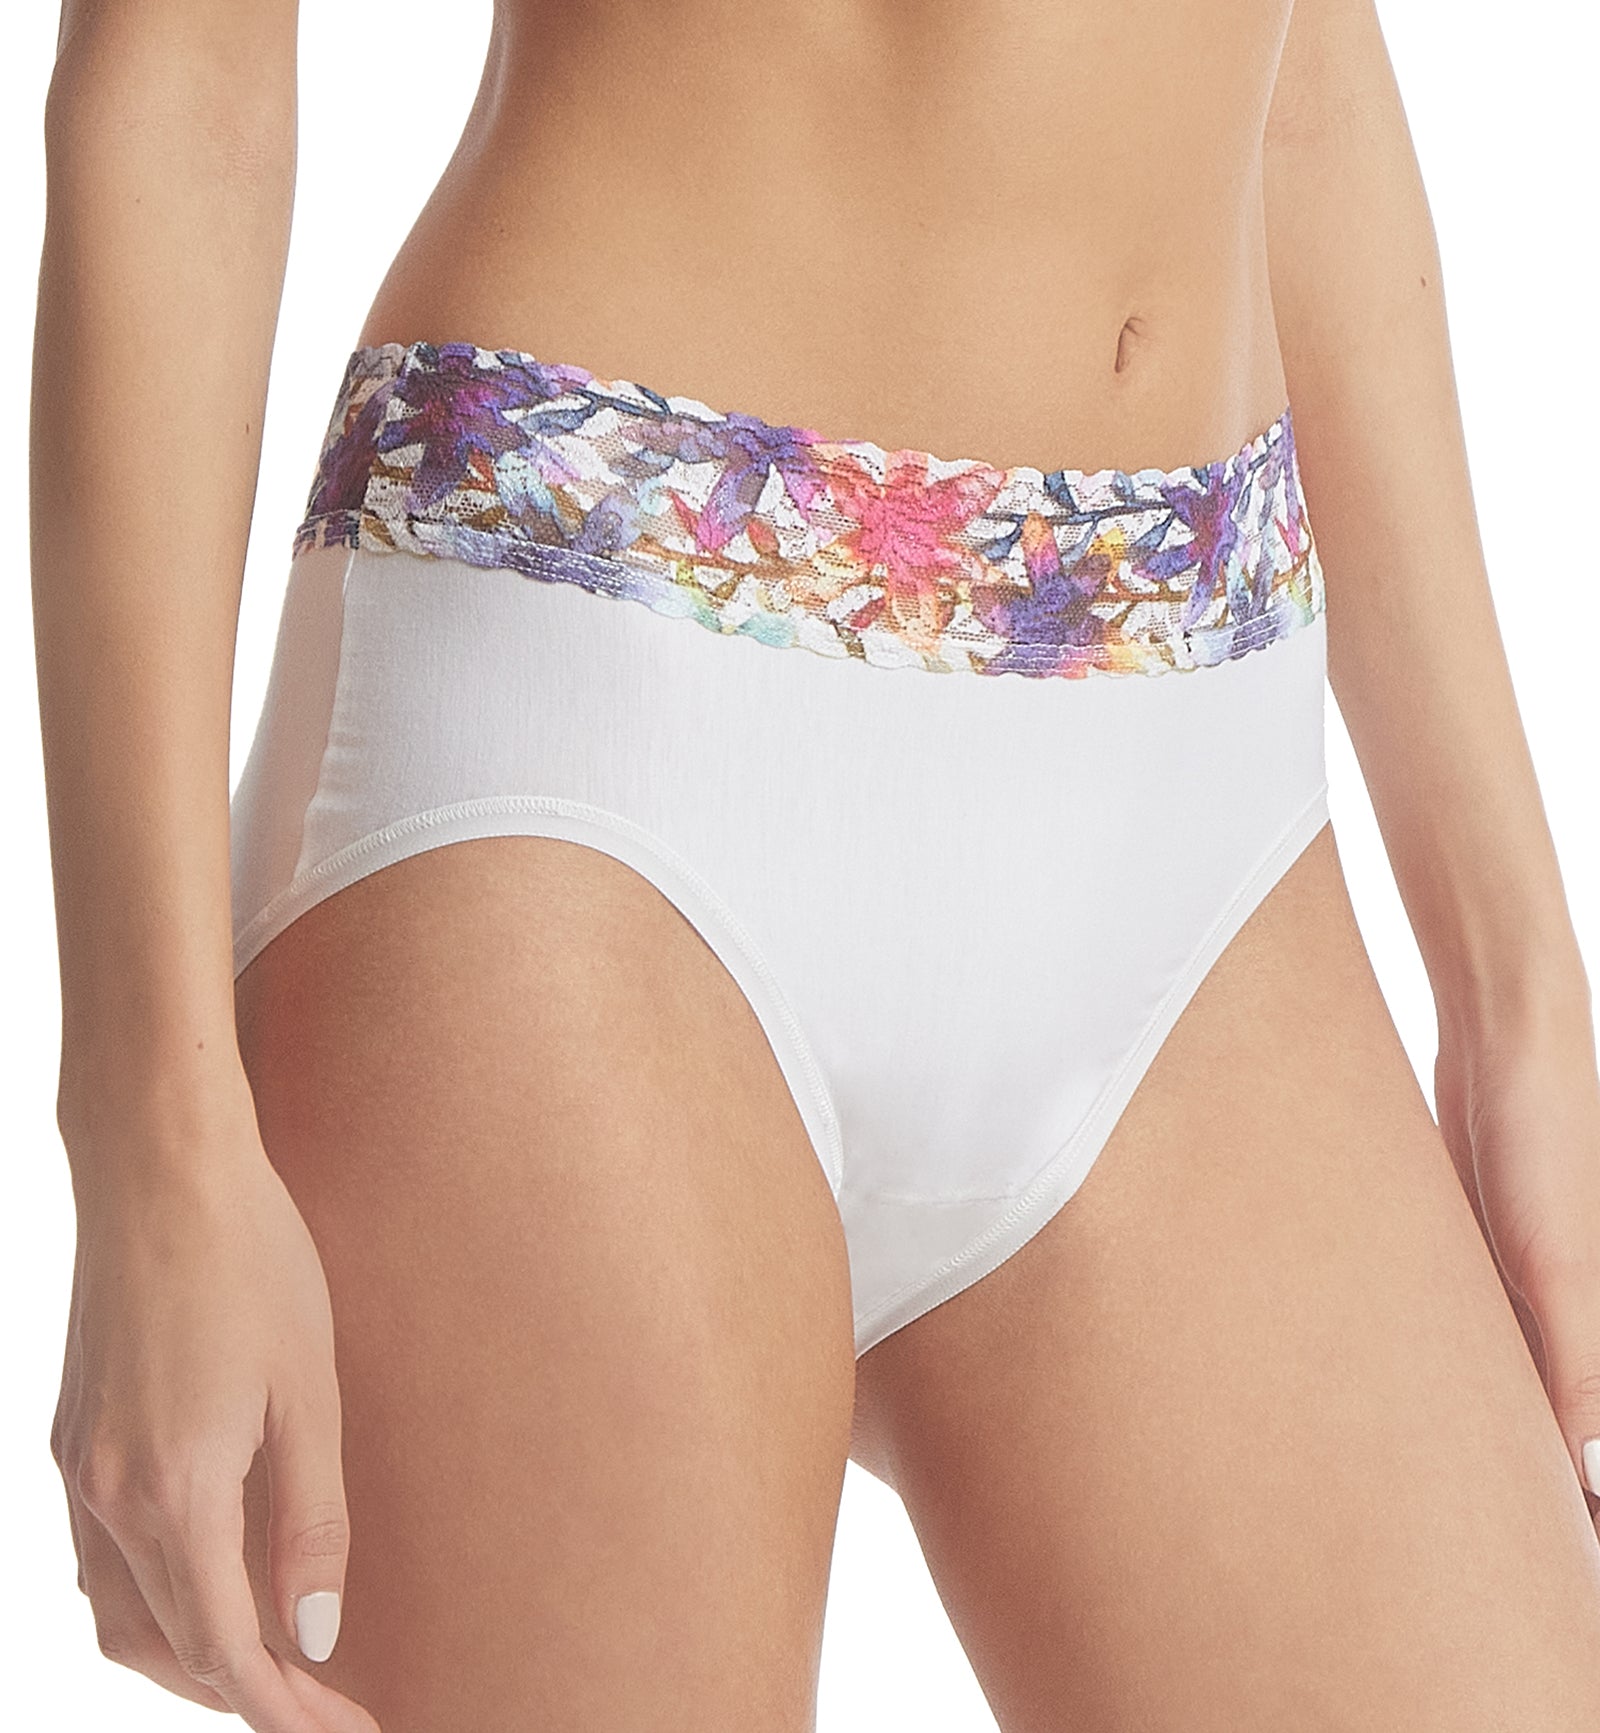 Hanky Panky Cotton-Spandex French Brief (892441),Small,White/Still Blooming - White/Still Blooming,Small